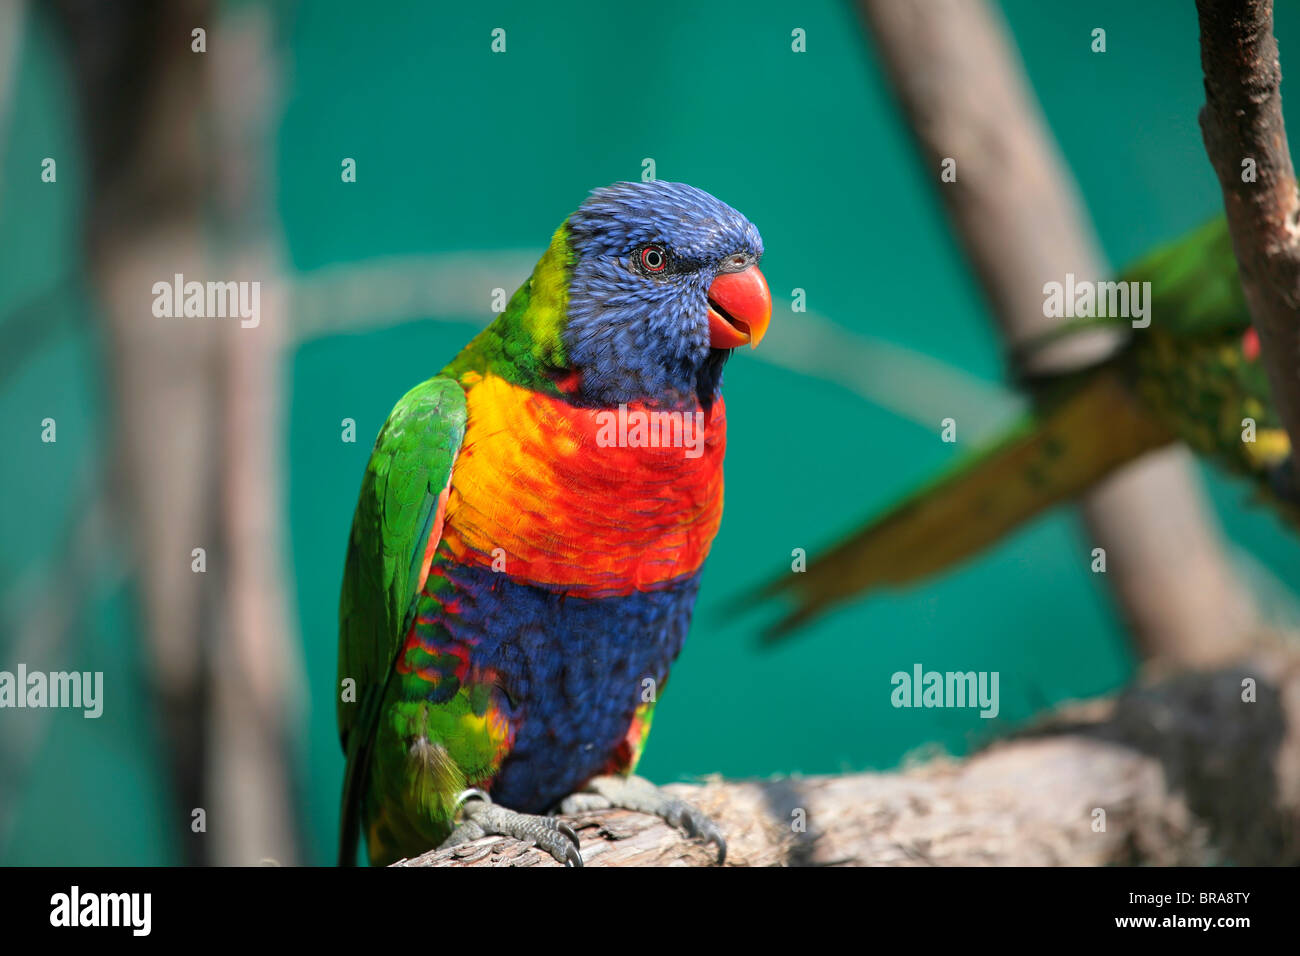 one small colorful lorikeet bird sitting on a branch Stock Photo